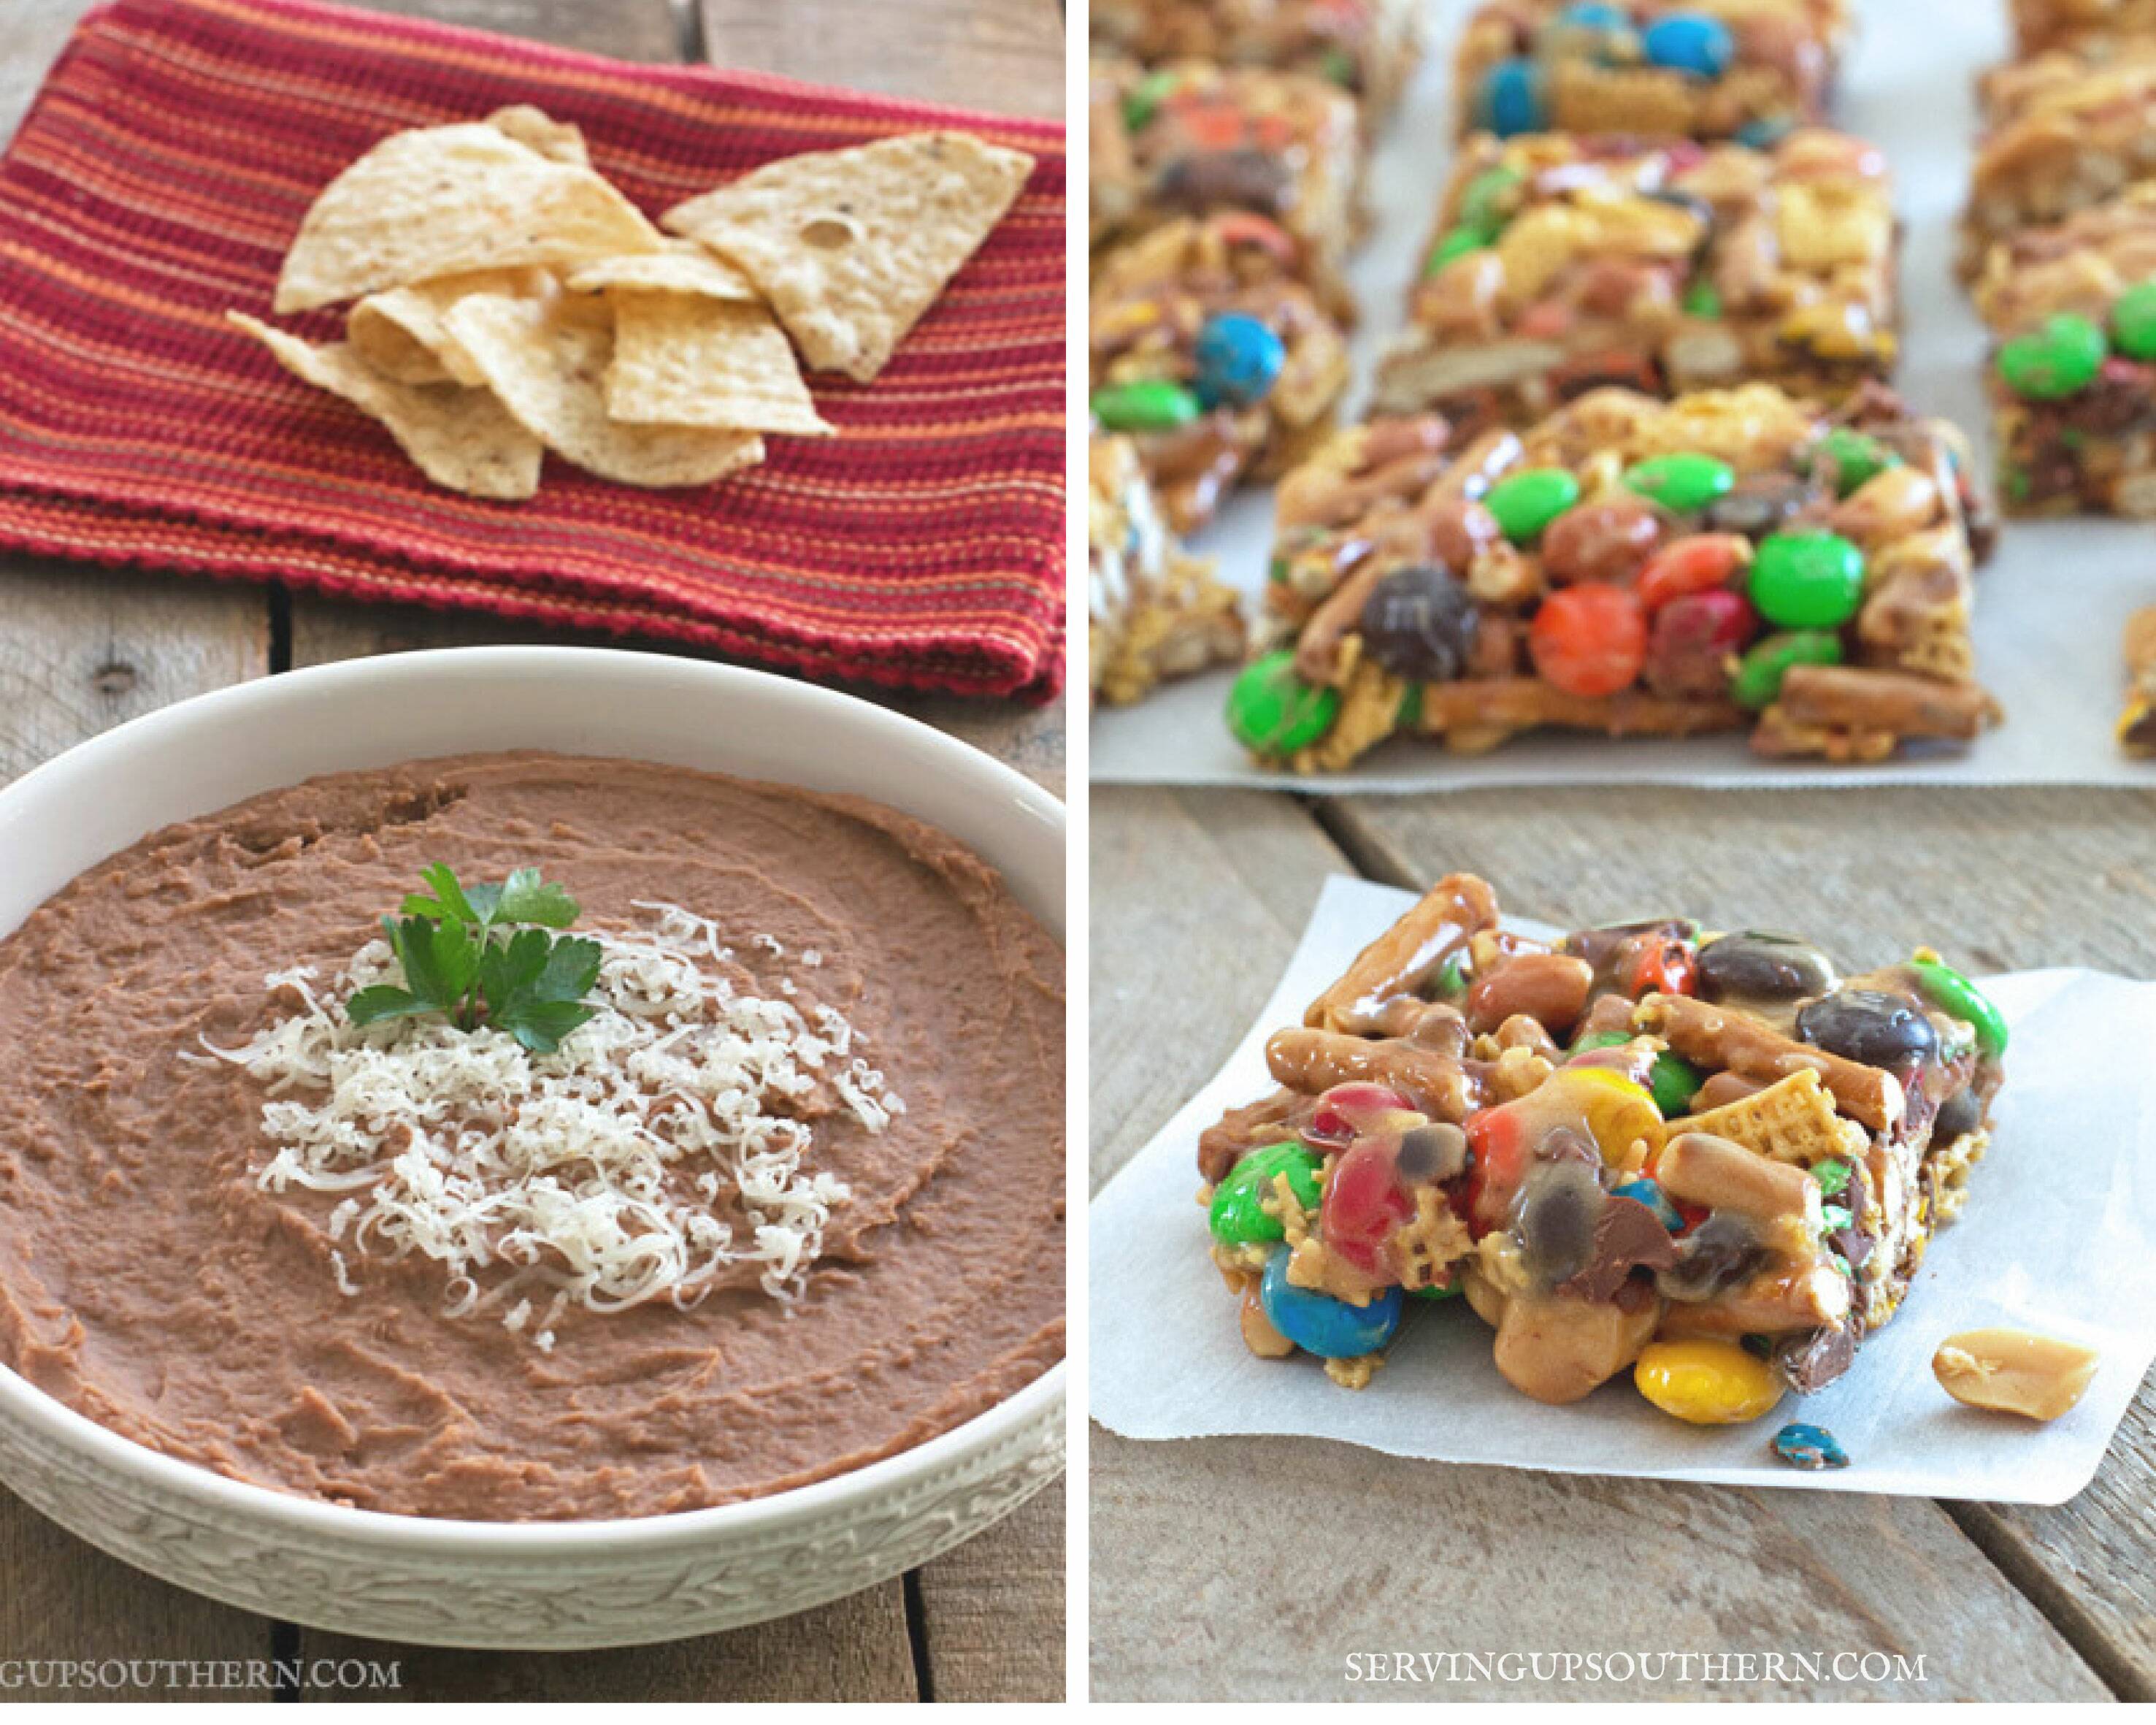 Two picture collage - one of refried beans and one of snack mix squares.